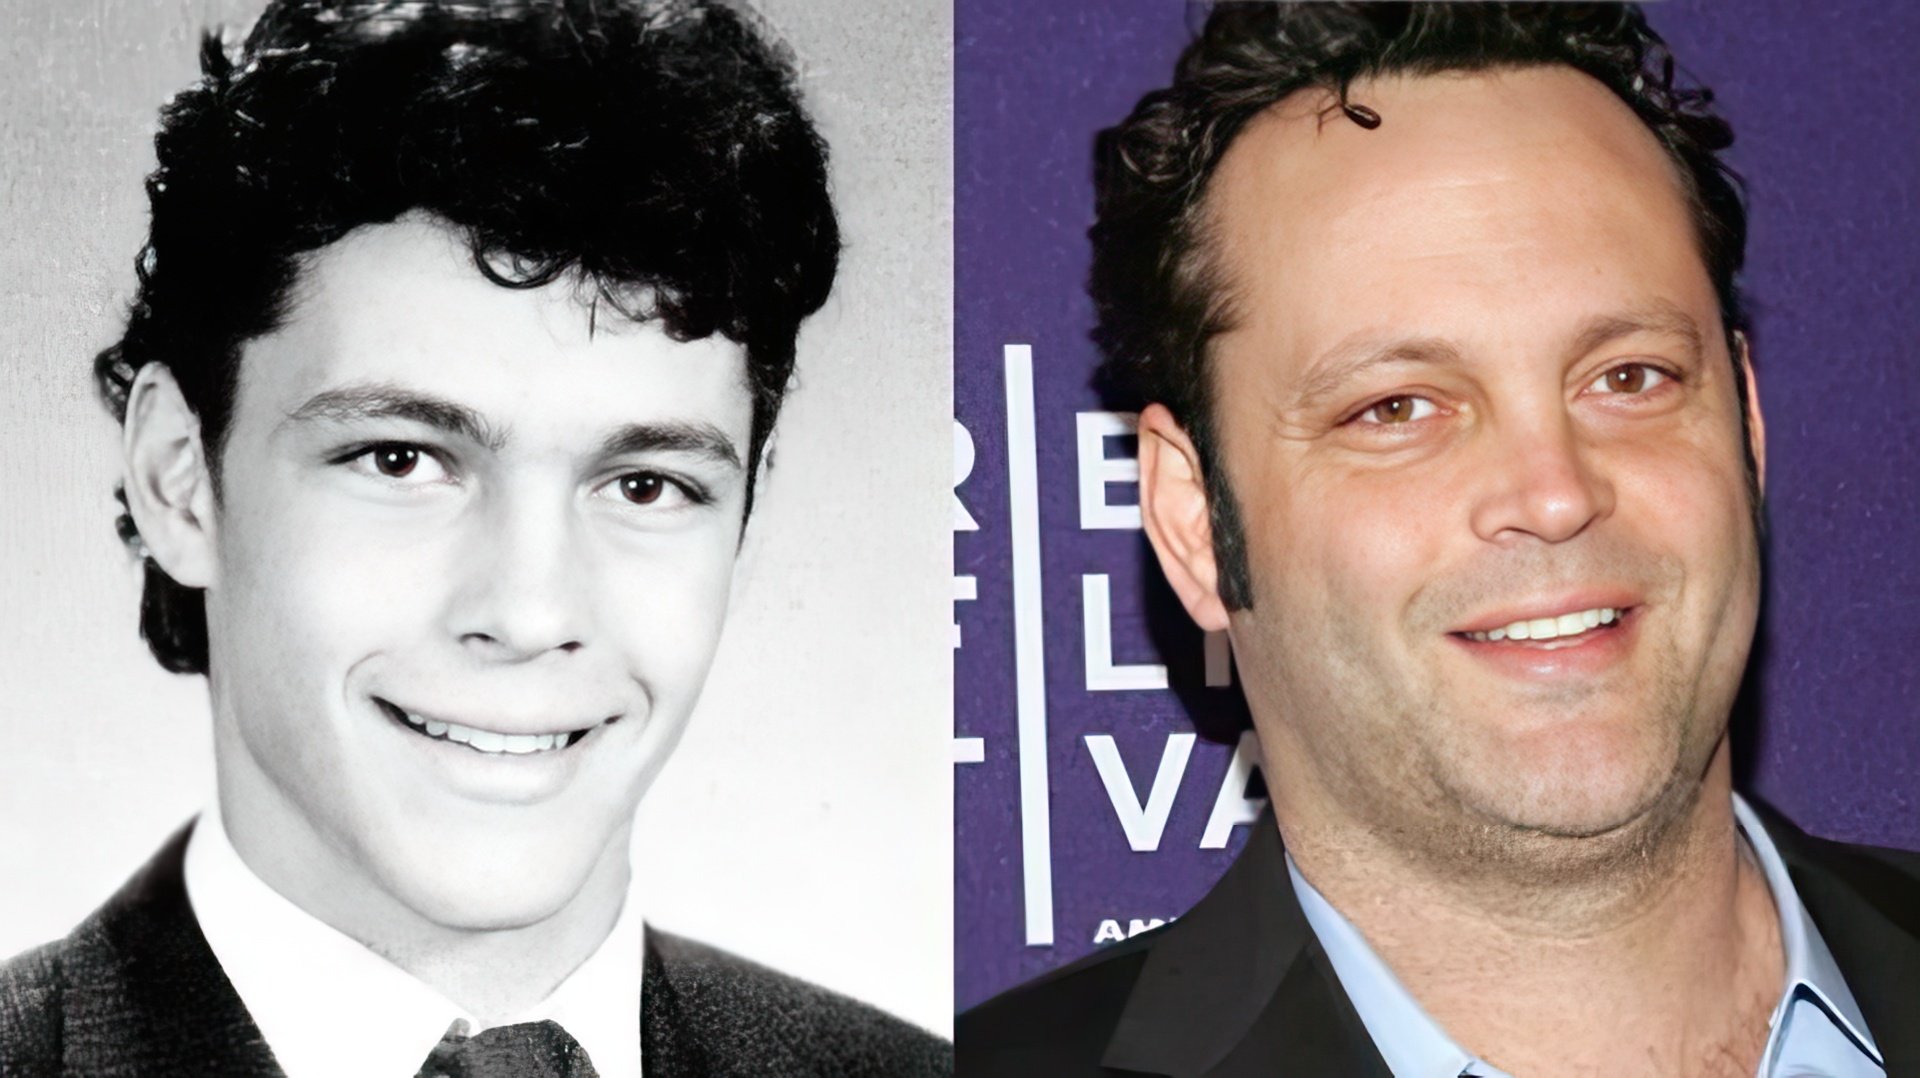 Vince Vaughn in his youth and now